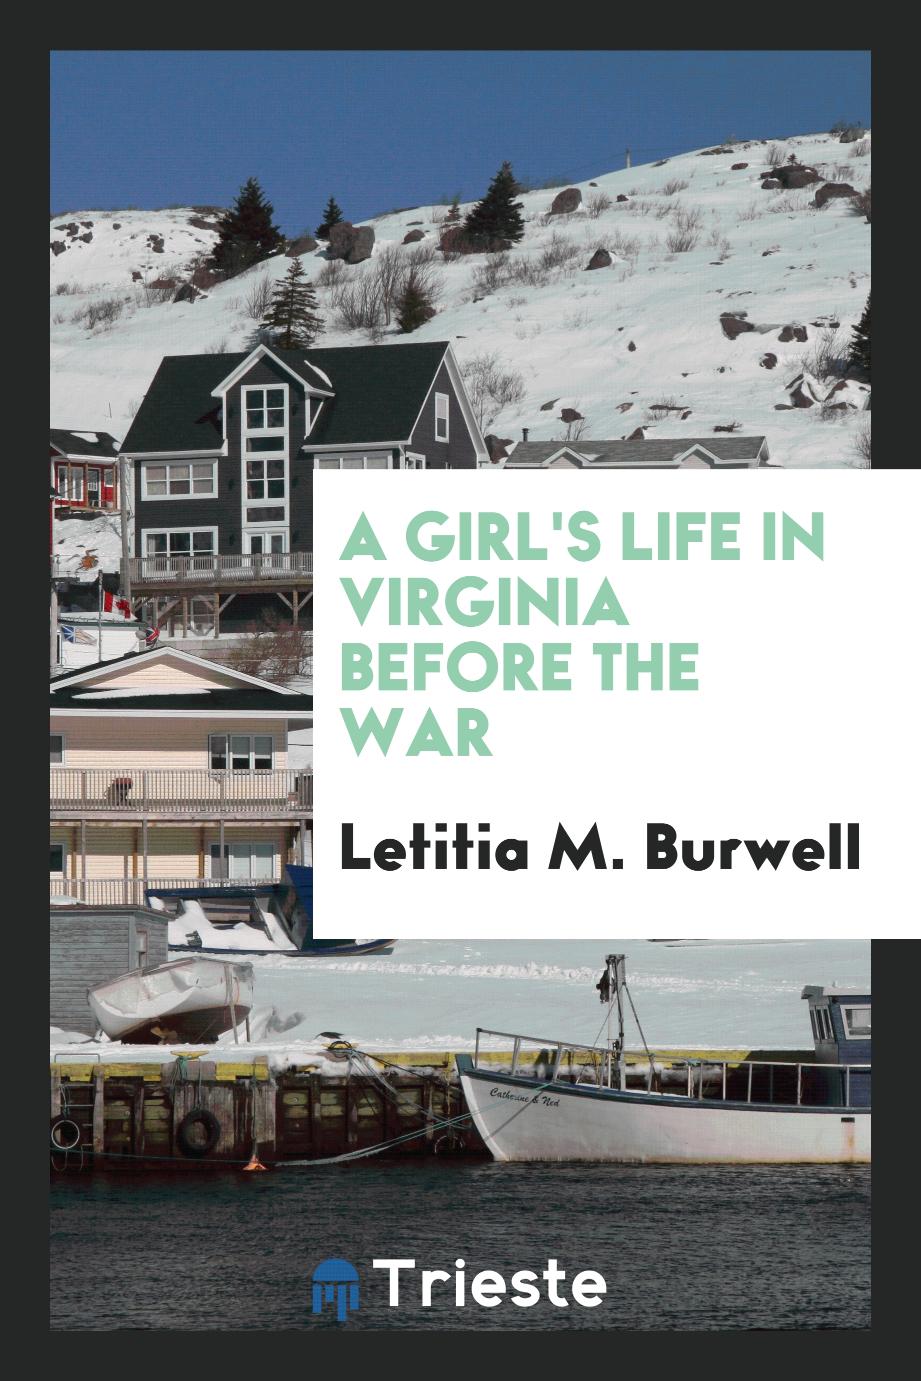 A girl's life in Virginia before the war